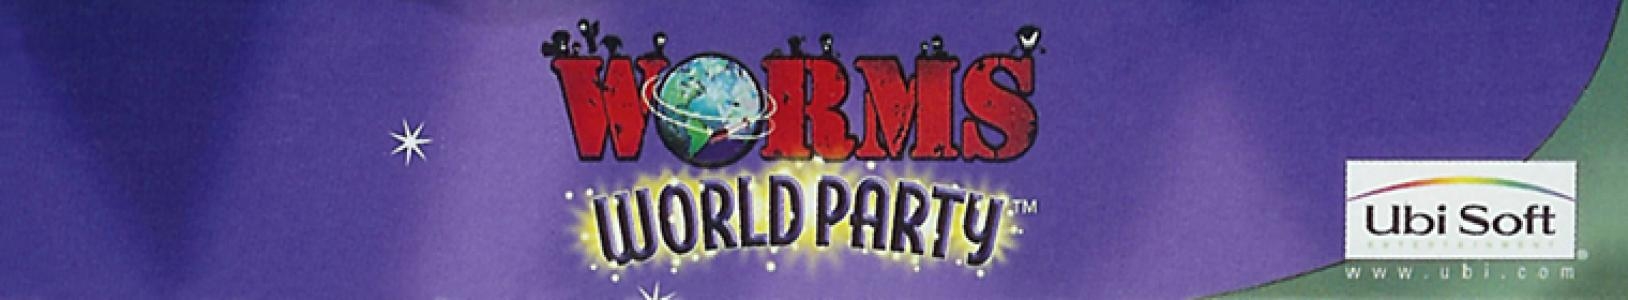 Worms World Party banner